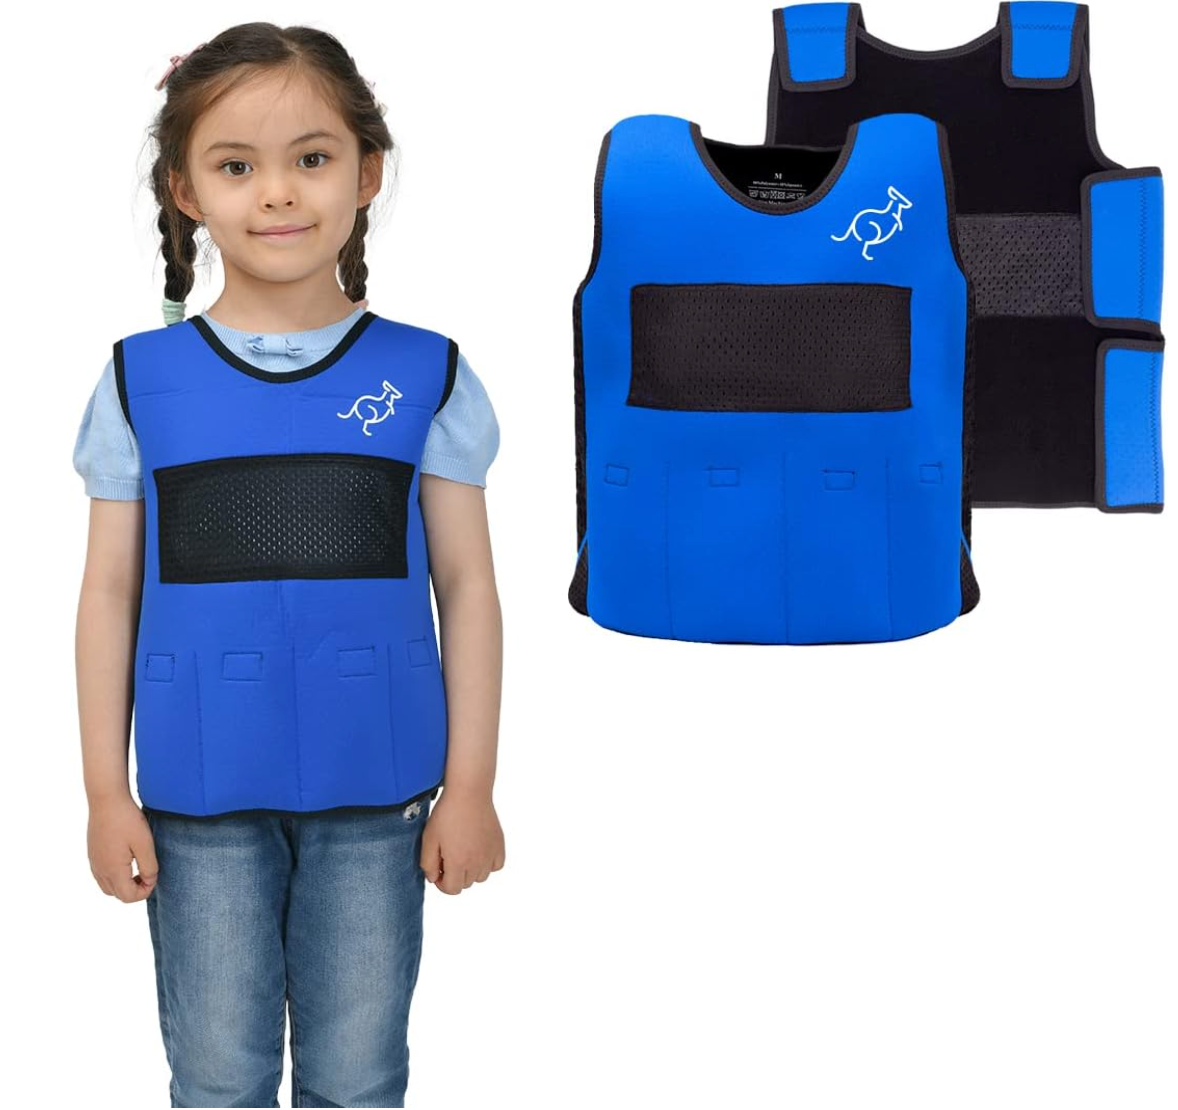 Weighted Vest For kids Compression Vest for Kids with Autism, Sensory Compression Vest for Kids with Processing Disorders